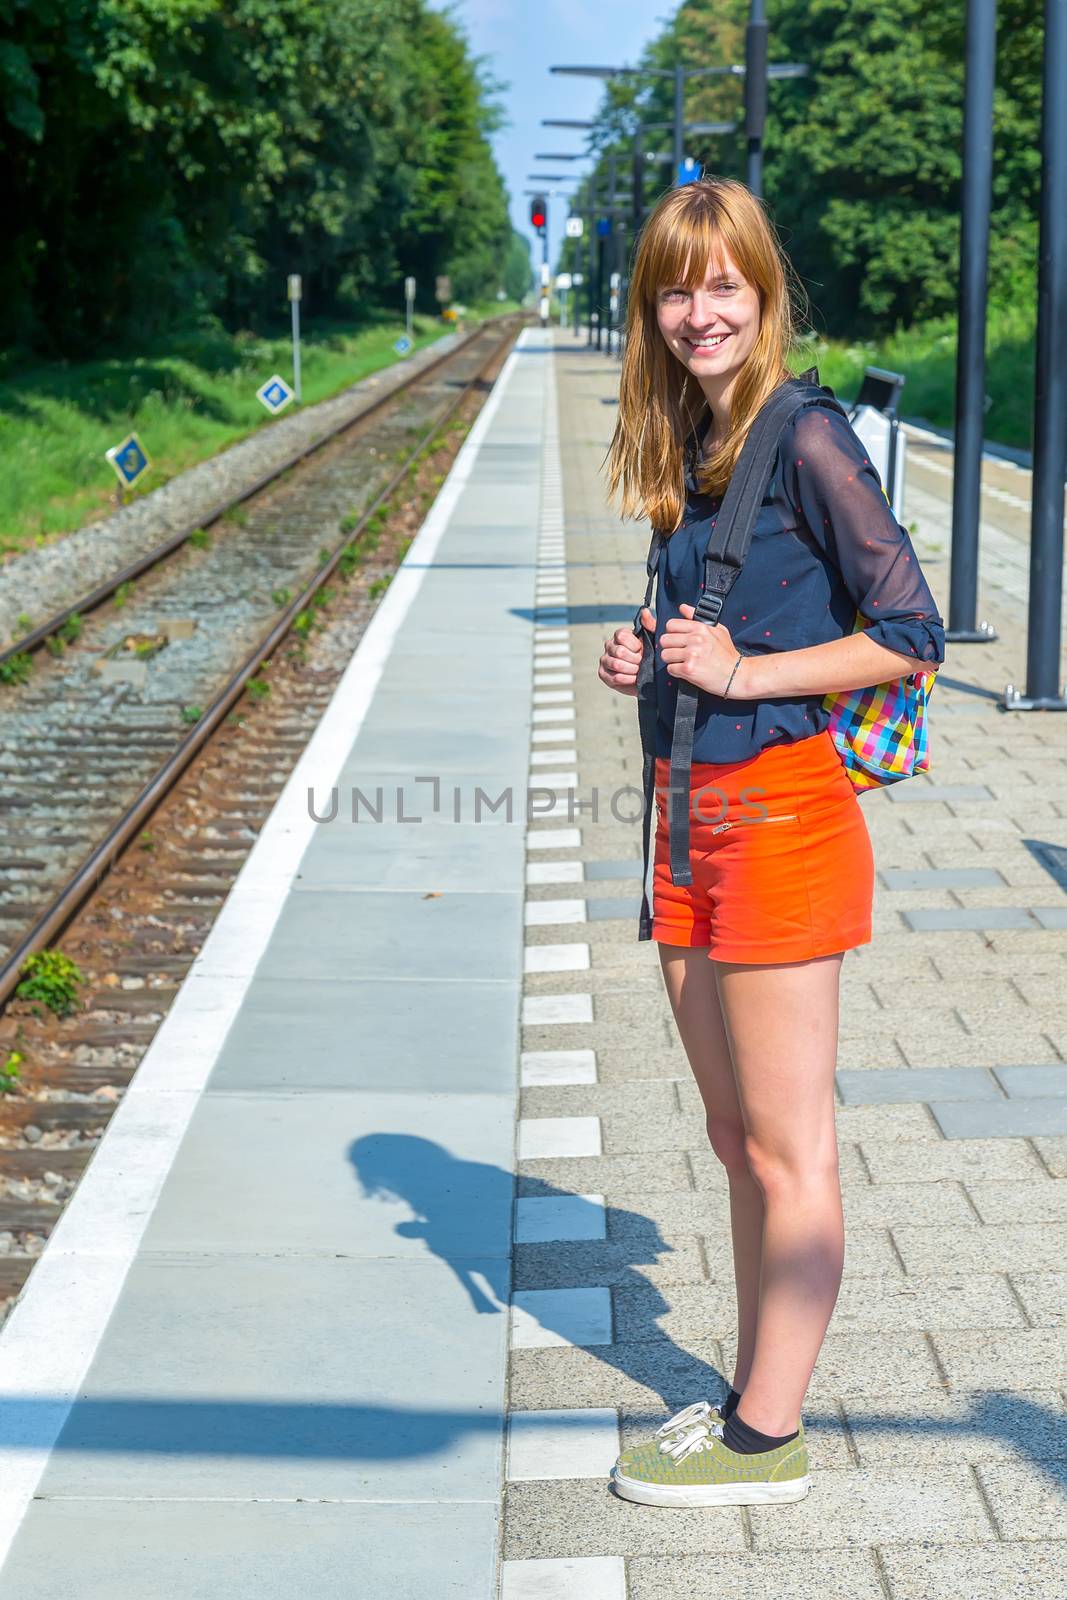 Dutch teenage girl standing at station waiting on train by BenSchonewille